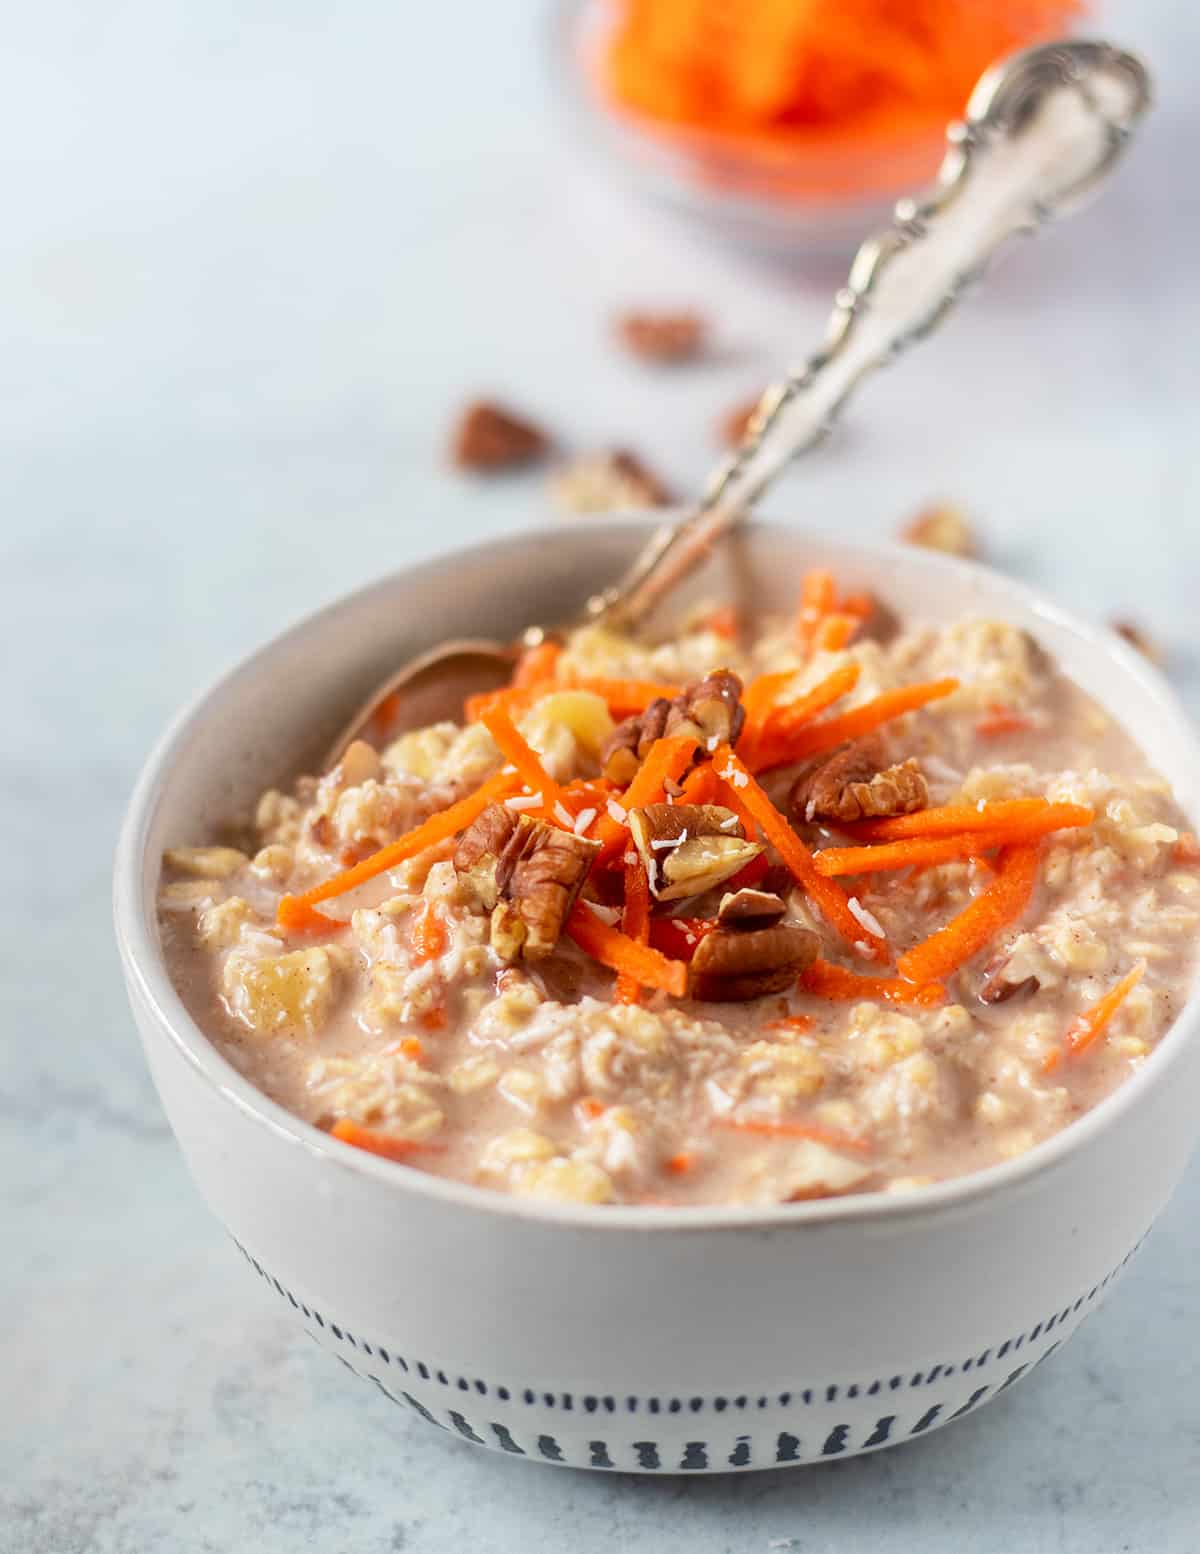 carrot cake overnight oats in a white bowl with blue trim that's garnished with shredded carrots, coconut flakes and chopped pecans. A silver spoon in the bowl for serving